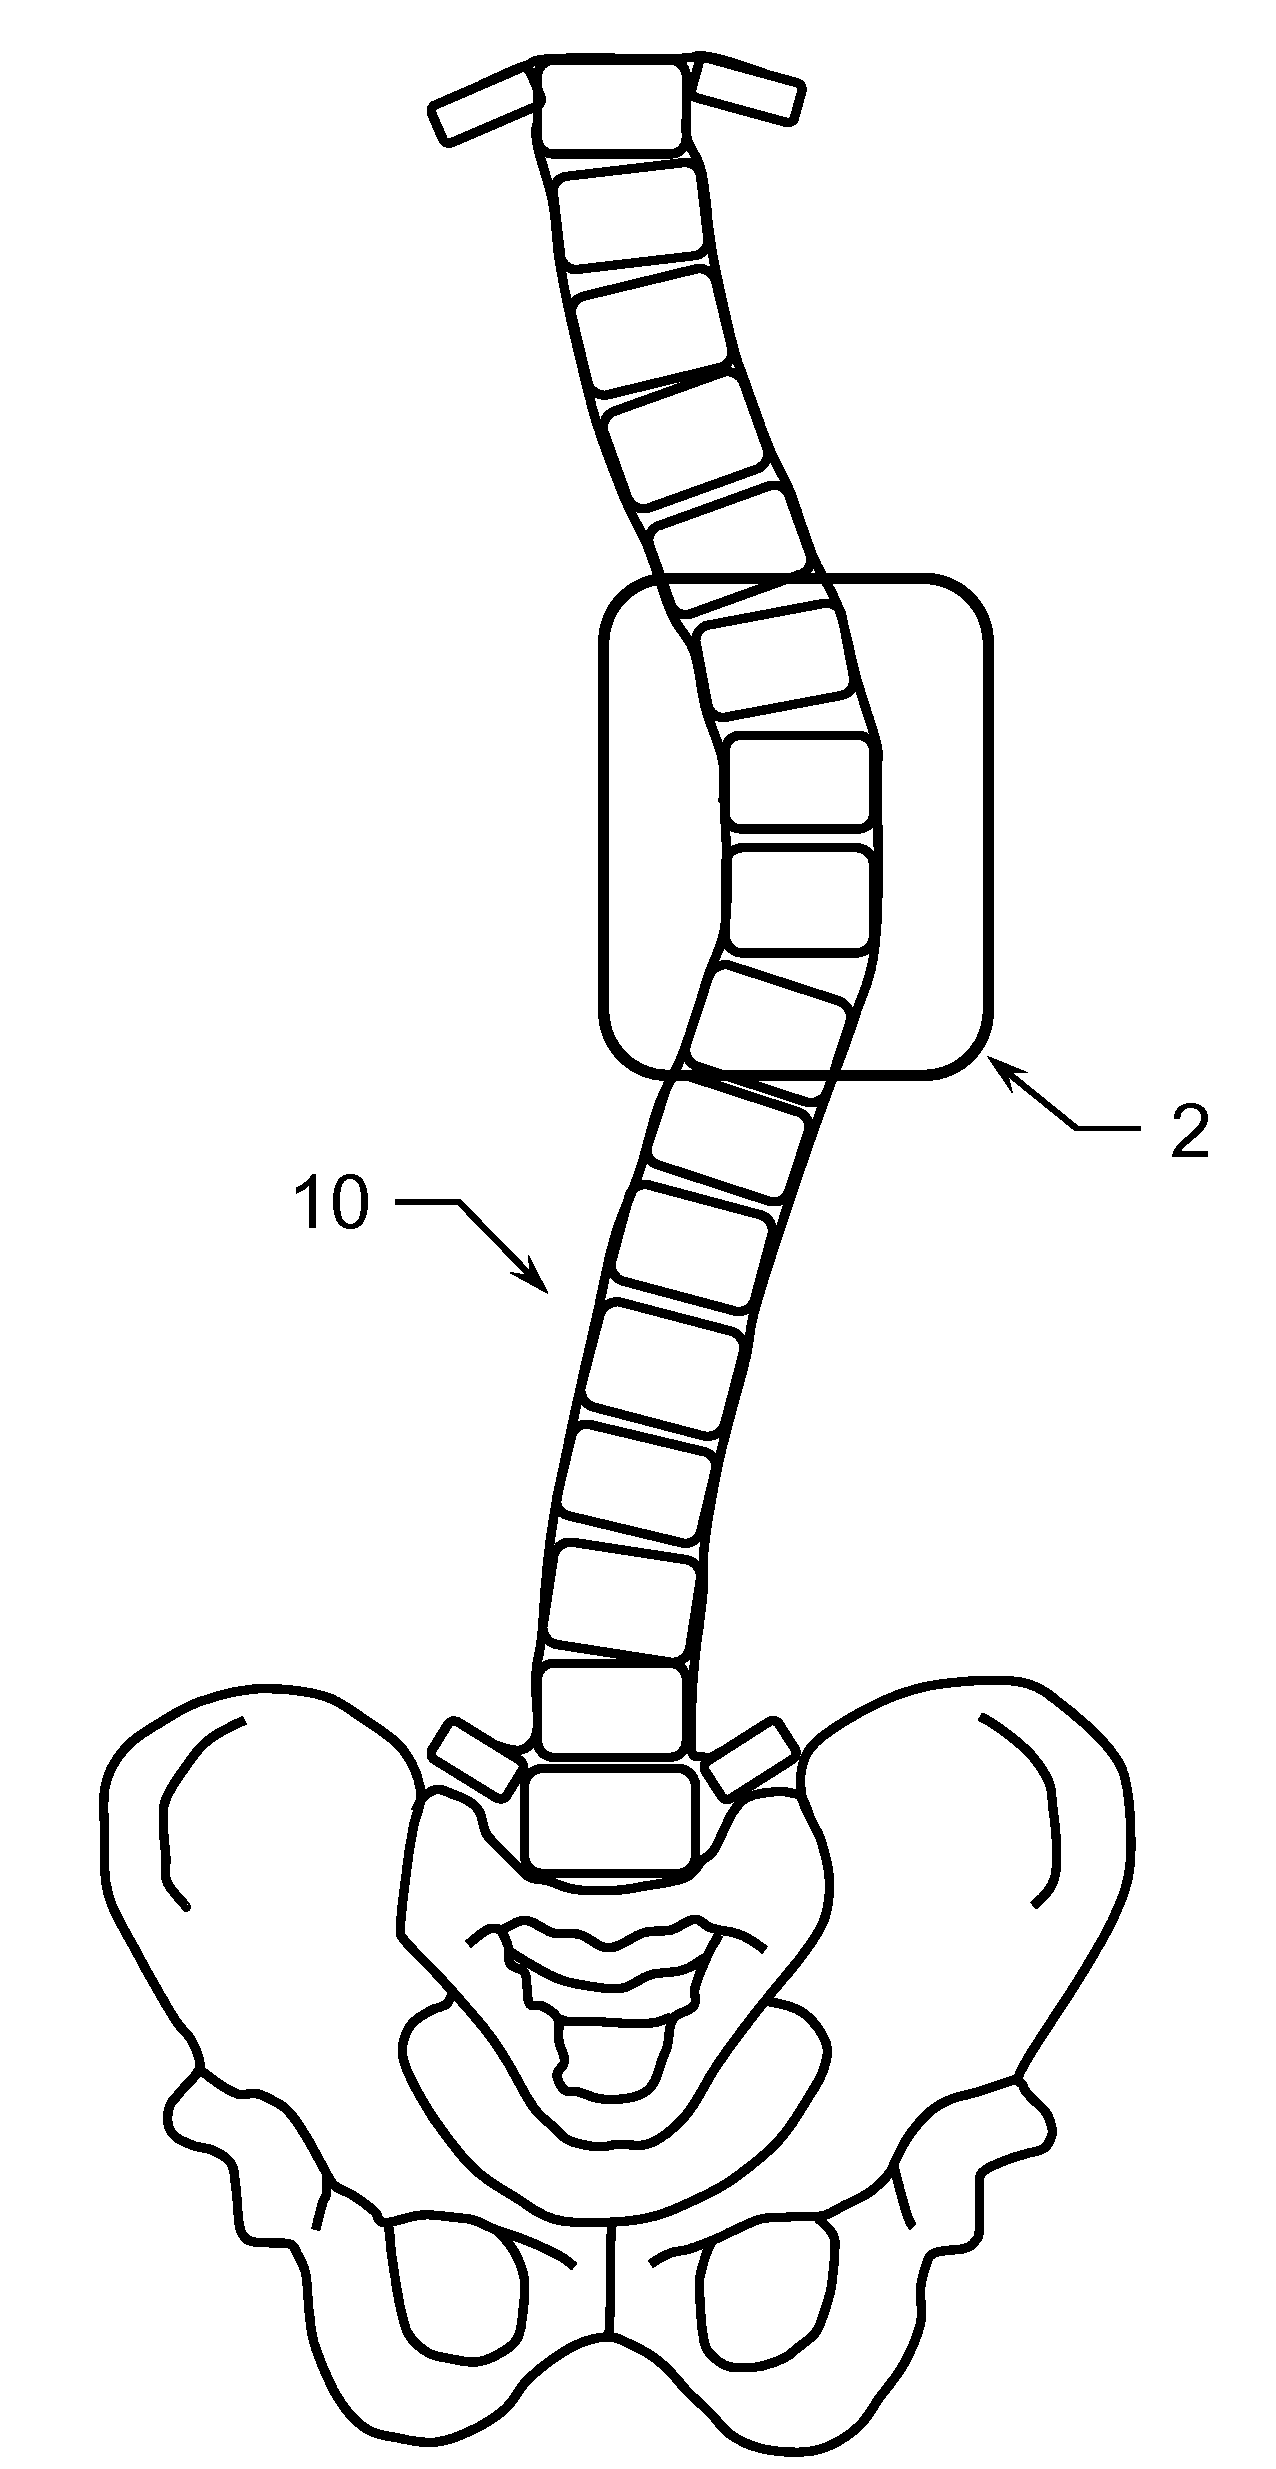 Method of Treating Scoliosis Using a Biological Implant